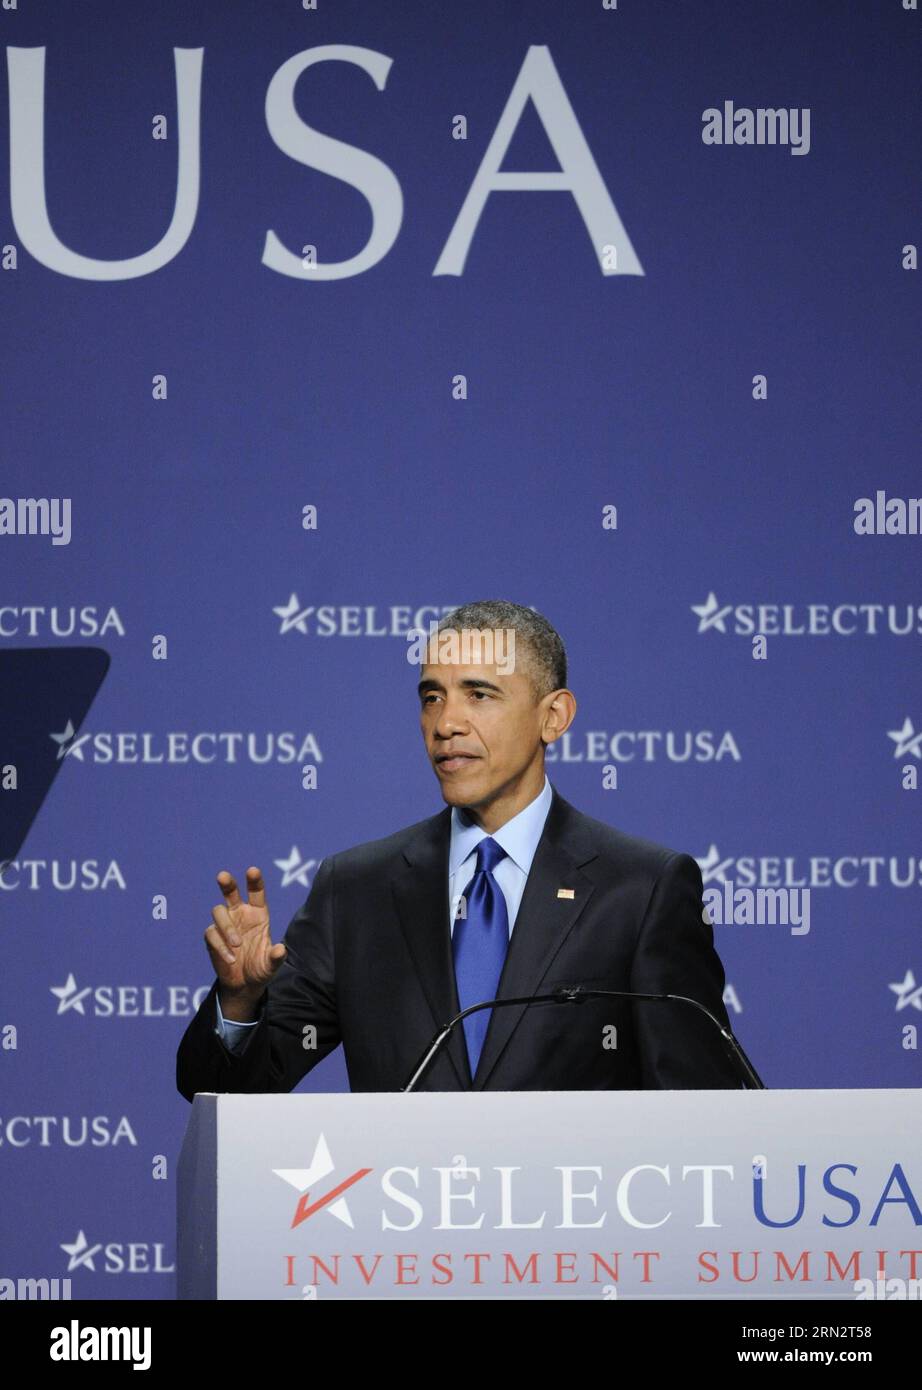 (150323) -- WASHINGTON D.C., March 23, 2015 -- U.S. President Barack Obama speaks during the 2015 SelectUSA Investment Summit in Washington D.C., capital of the United States, March 23, 2015. U.S. President Barack Obama on Monday announced a series of new measures to lure more foreign investment and bolster economic recovery. ) U.S.-WASHINGTON D.C.-SELECTUSA-INVESTMENT SUMMIT BaoxDandan PUBLICATIONxNOTxINxCHN   Washington D C March 23 2015 U S President Barack Obama Speaks during The 2015  Investment Summit in Washington D C Capital of The United States March 23 2015 U S President Barack Obama Stock Photo